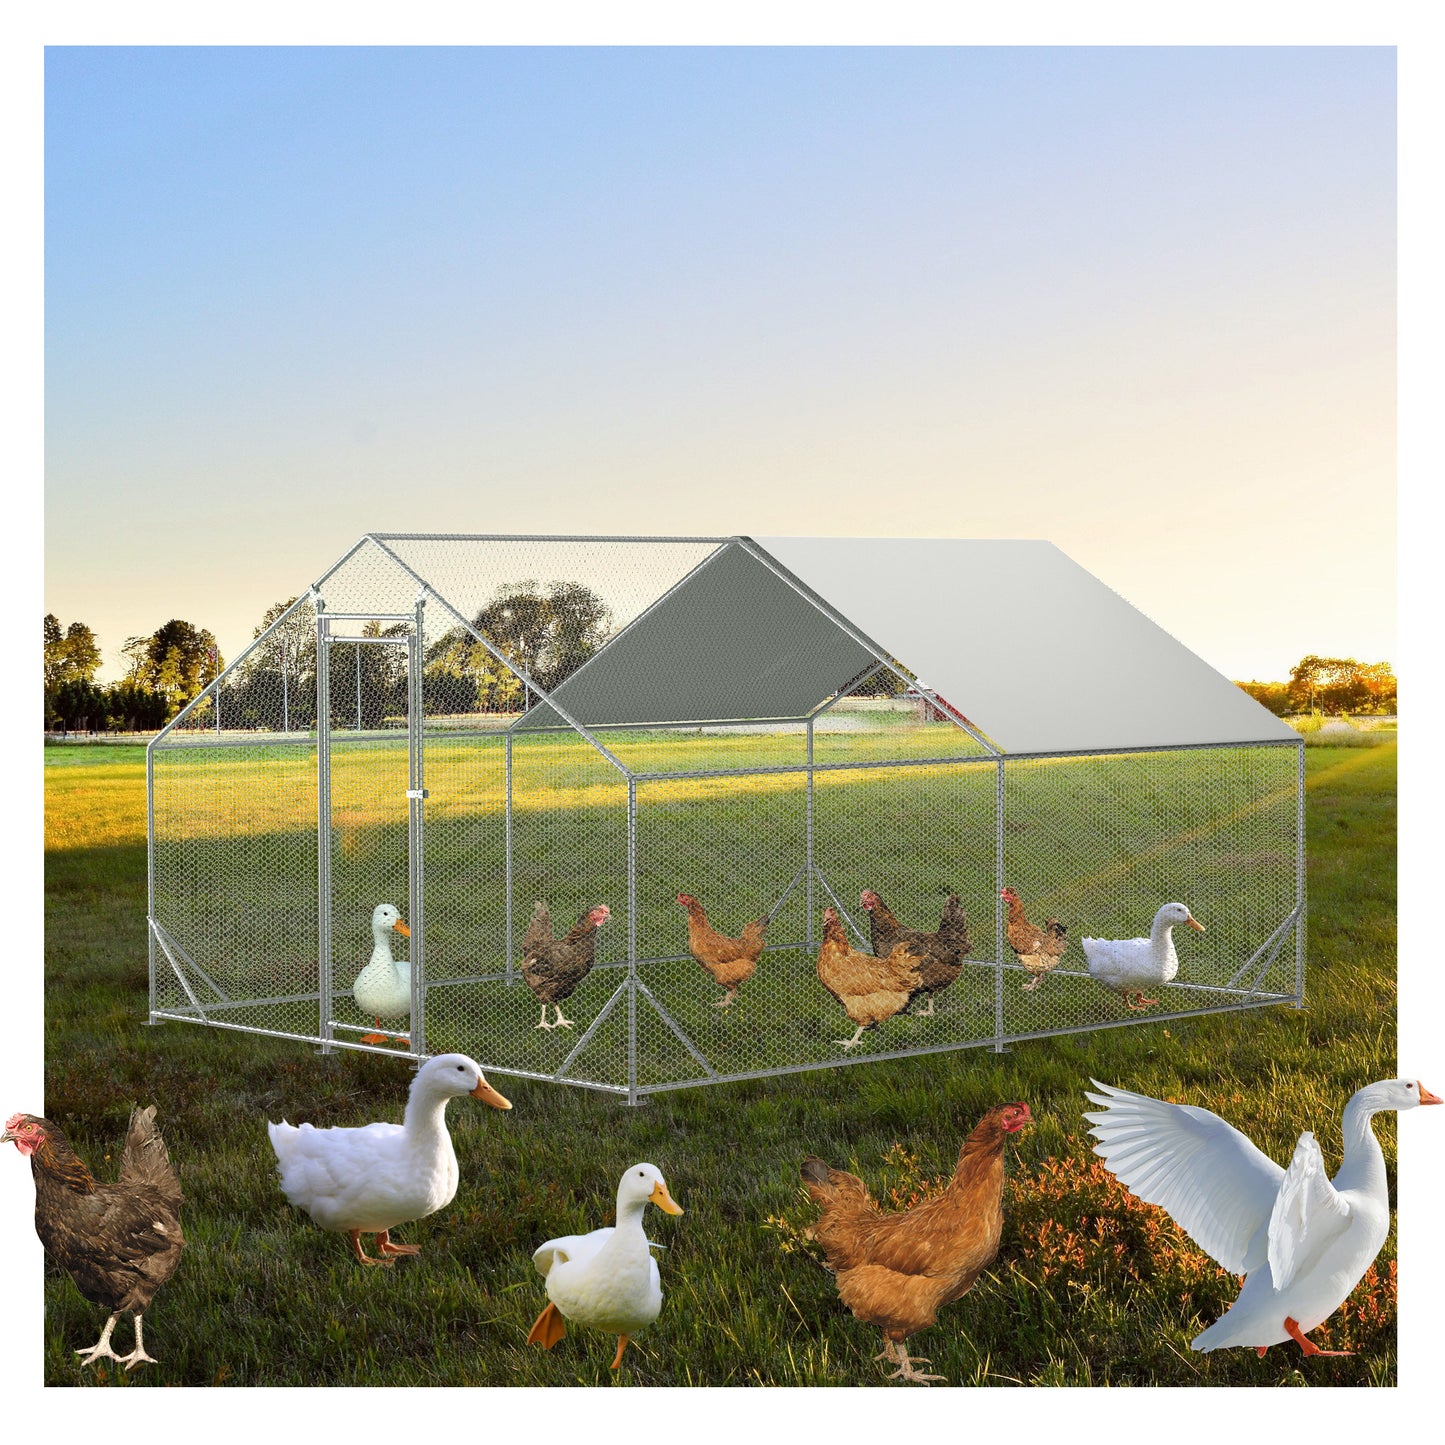 Outdoor Large Metal Chicken Run Coop with 1 piece of Waterproof Cover, Garden Backyard Walk-in Hen Cage Poultry Pet Hutch for Farm Use